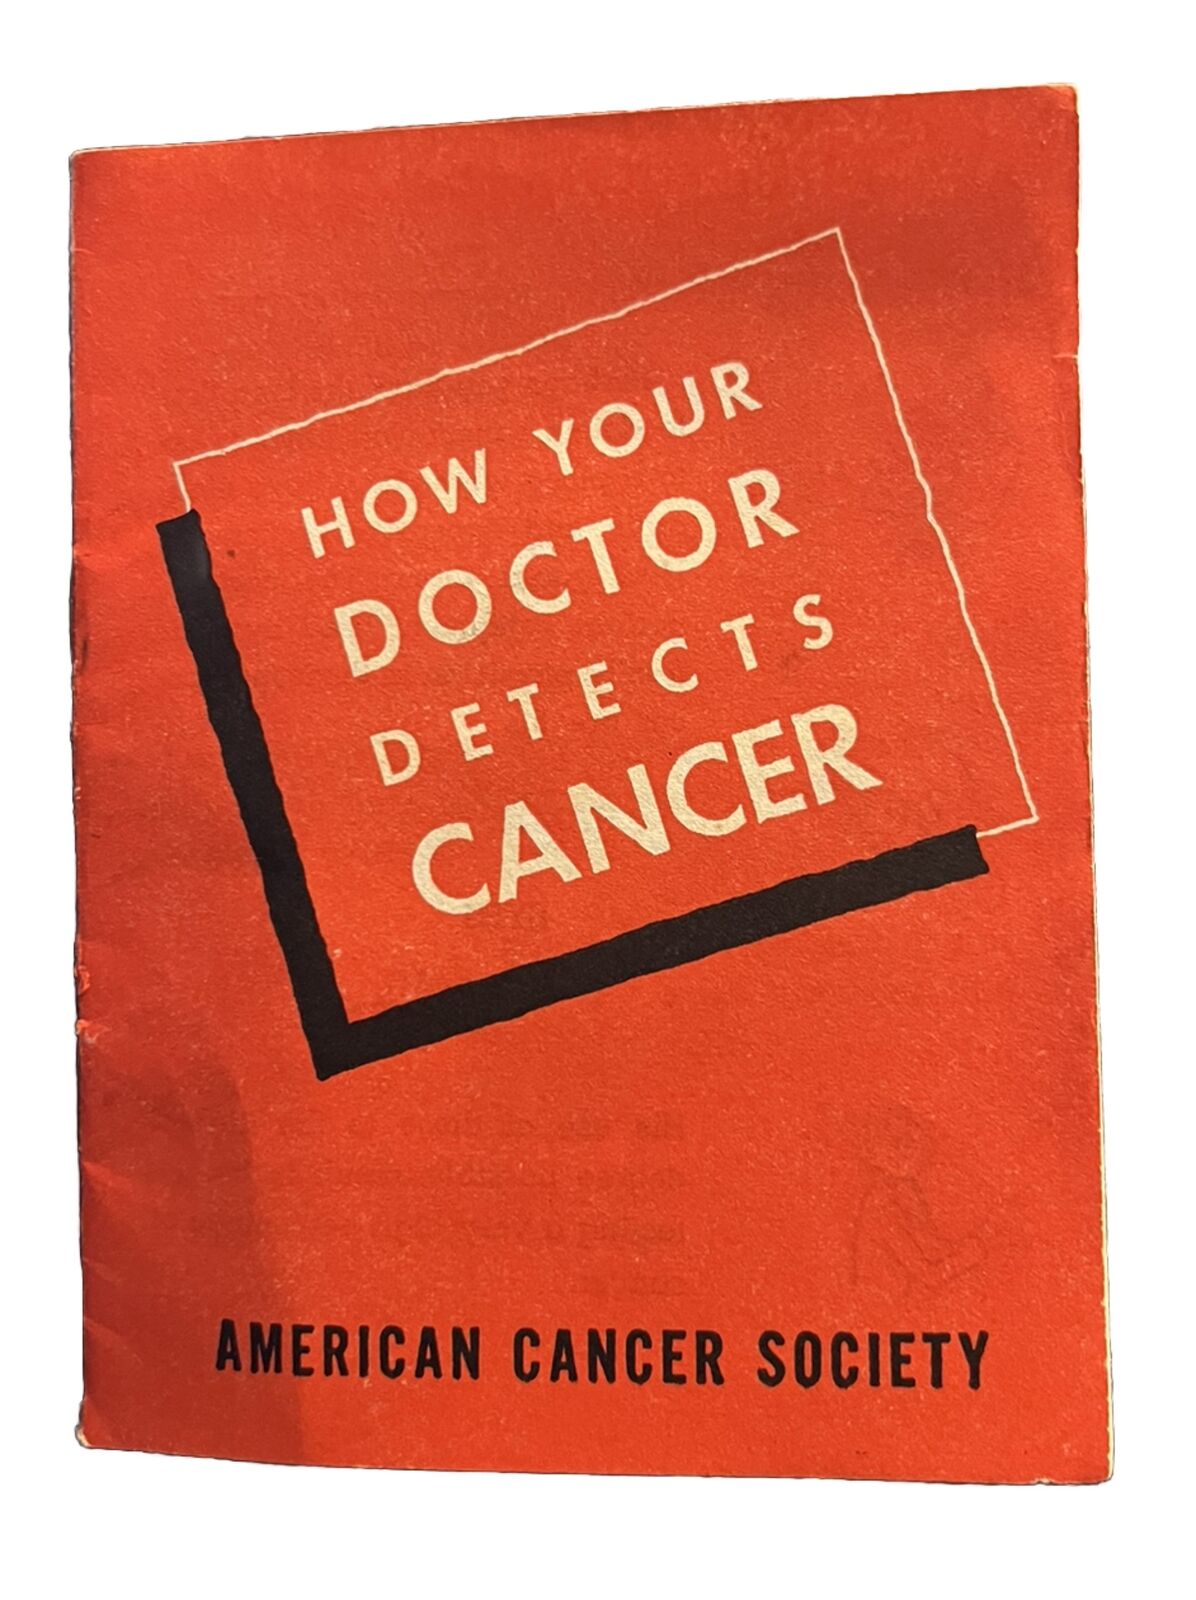 1946 American Cancer Society - How Your Doctor Detects Cancer - Field Army NC 